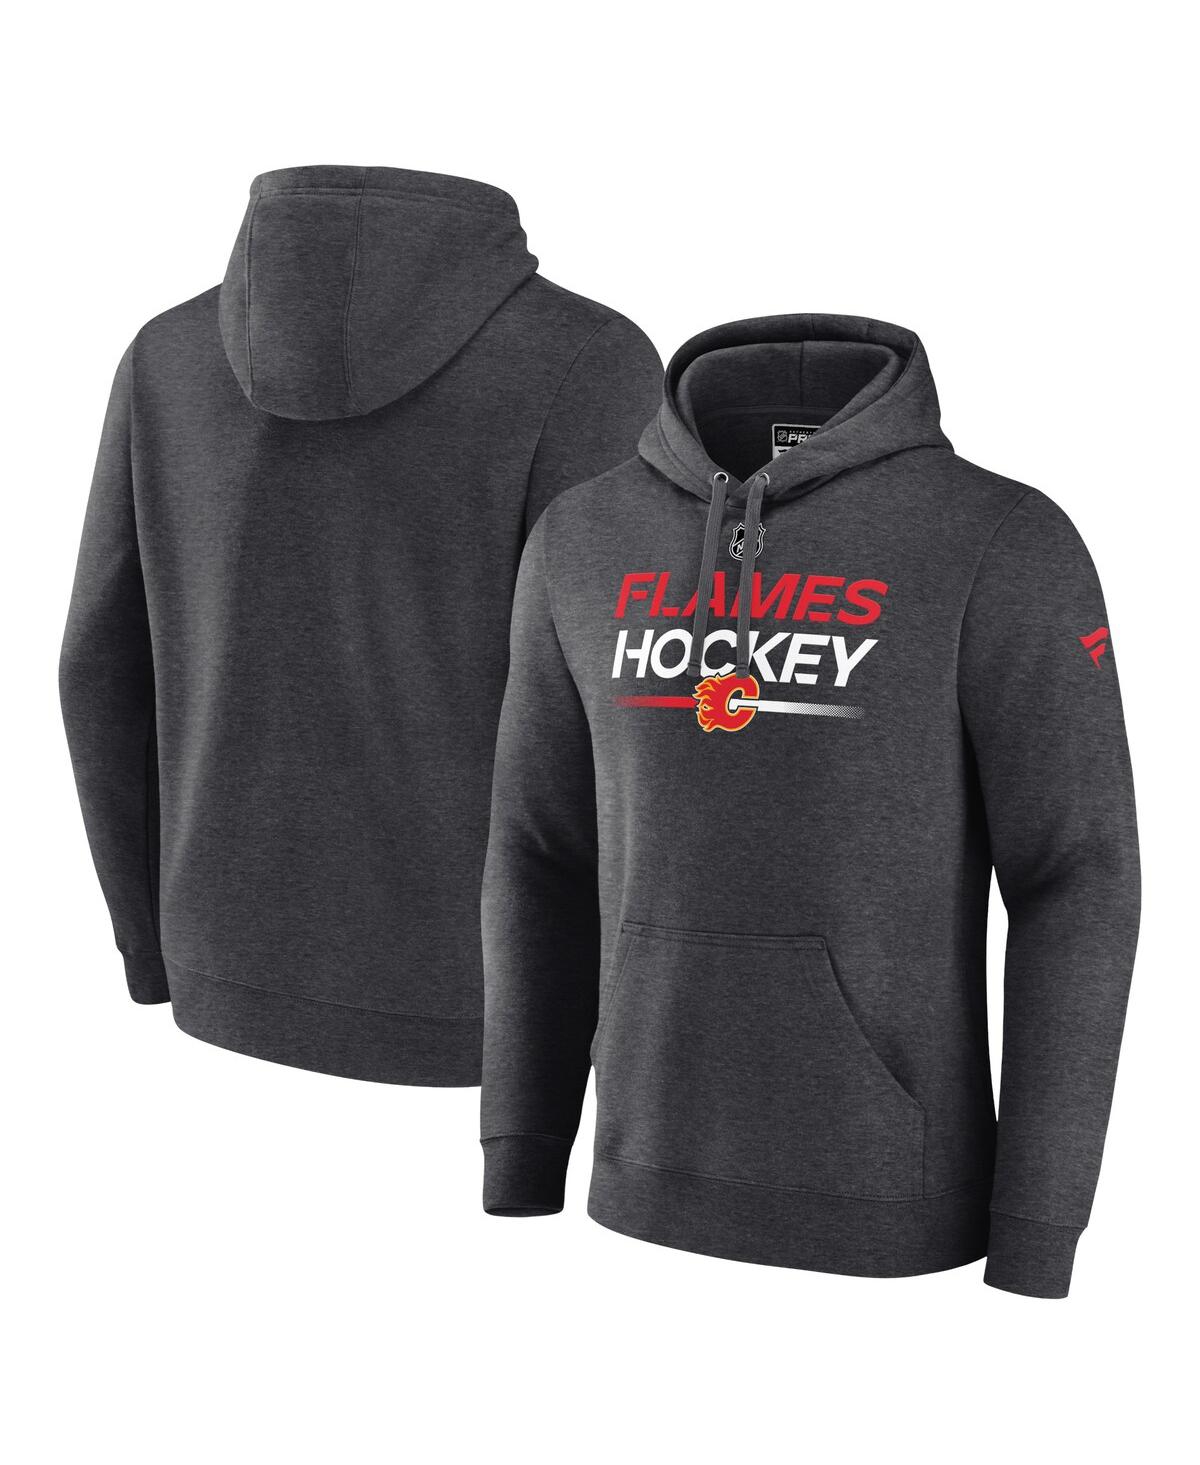 Men's Fanatics Heather Charcoal Calgary Flames Authentic Pro Pullover Hoodie - Heather Charcoal